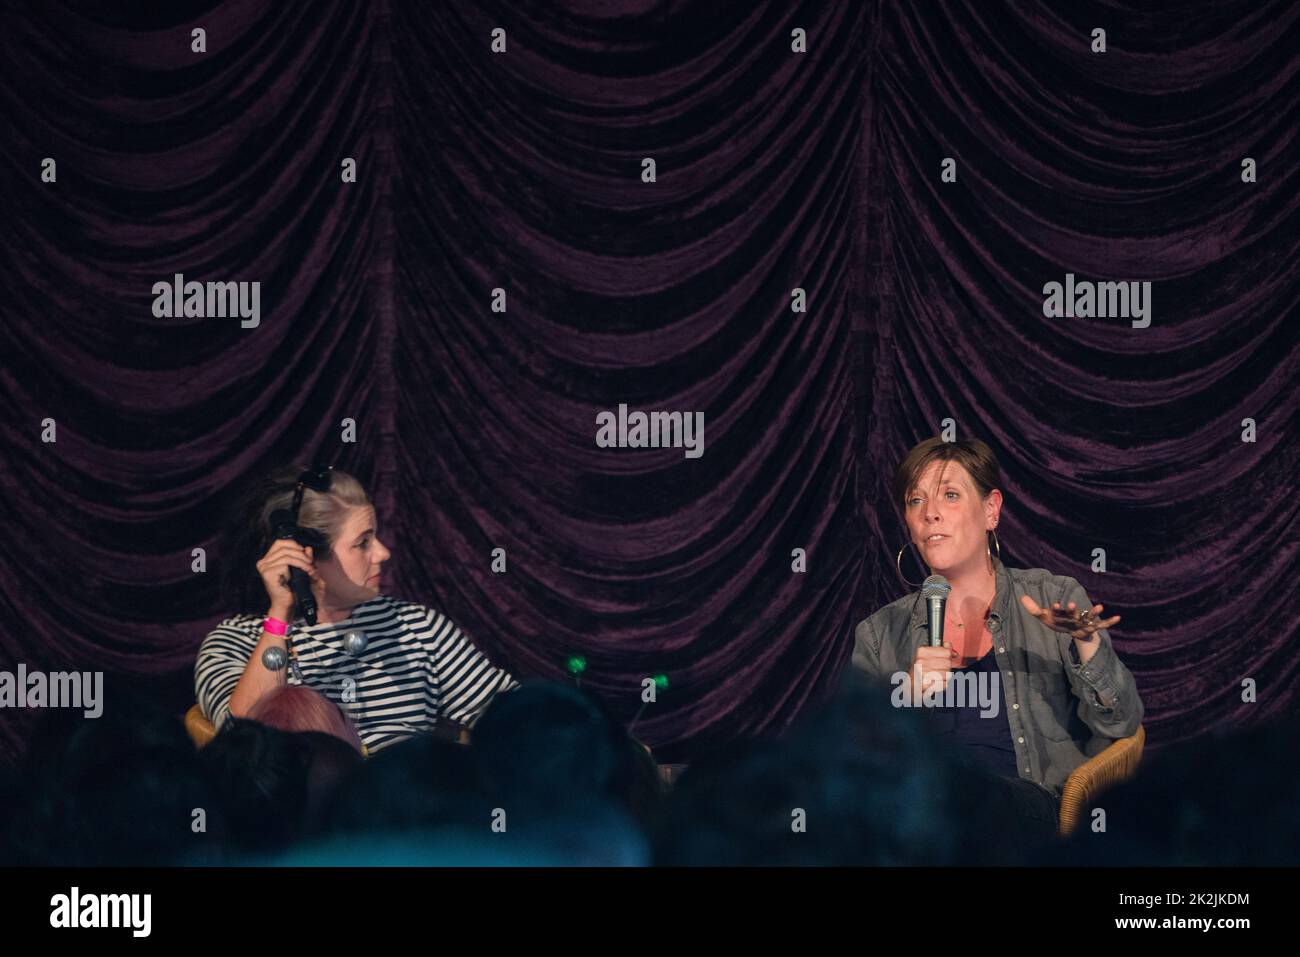 Caitlin Moran and Jess Phillips at eh Babbling Tongues Stage at the Green Man 2022 music festival in Wales. Photo: Rob Watkins/Alamy Stock Photo